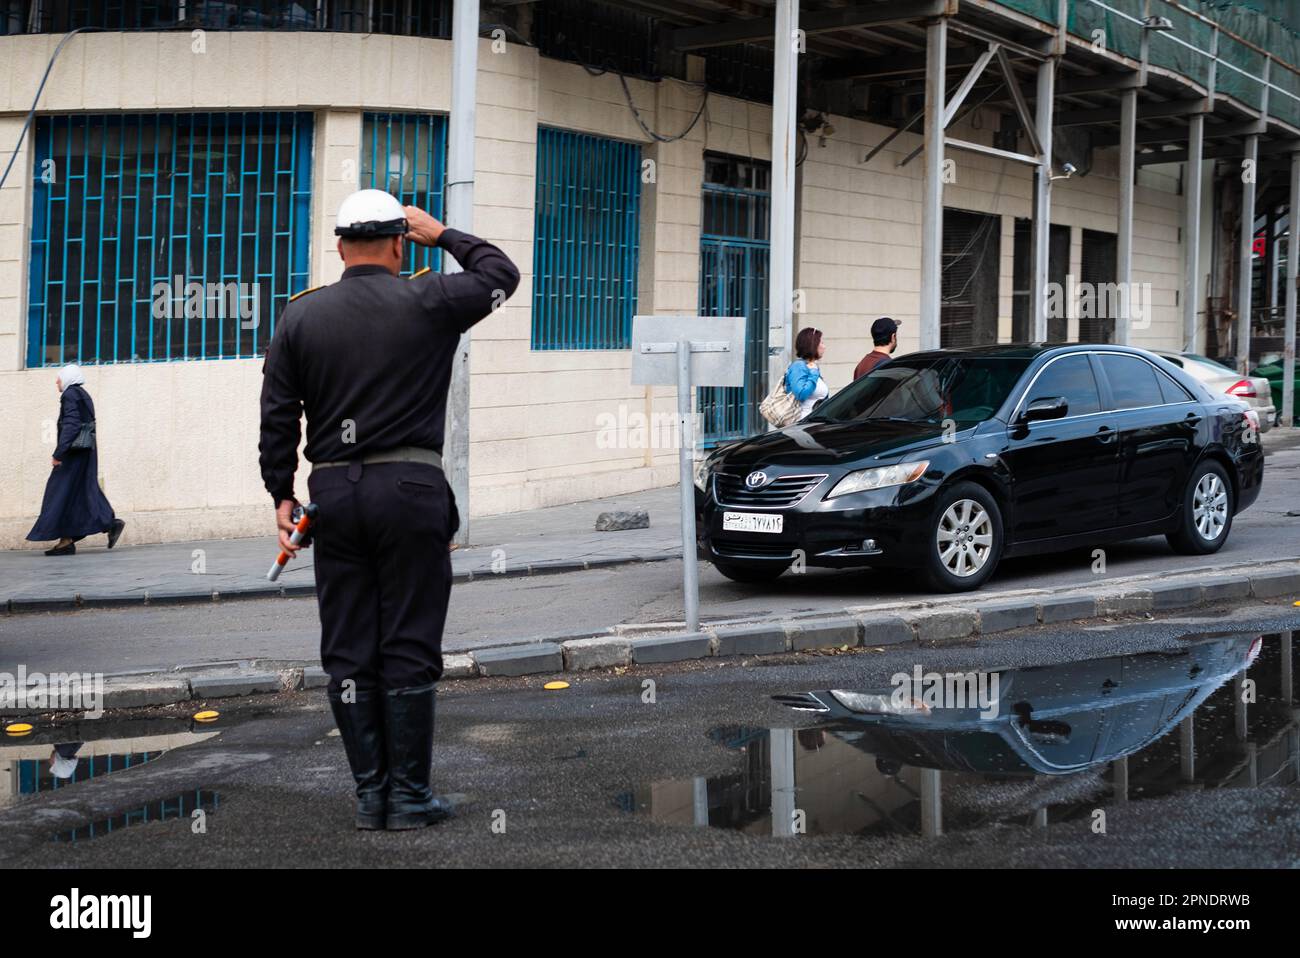 Damascus, Syria - April, 2023: Police officer salutes a passing car in Damascus, Syria Stock Photo